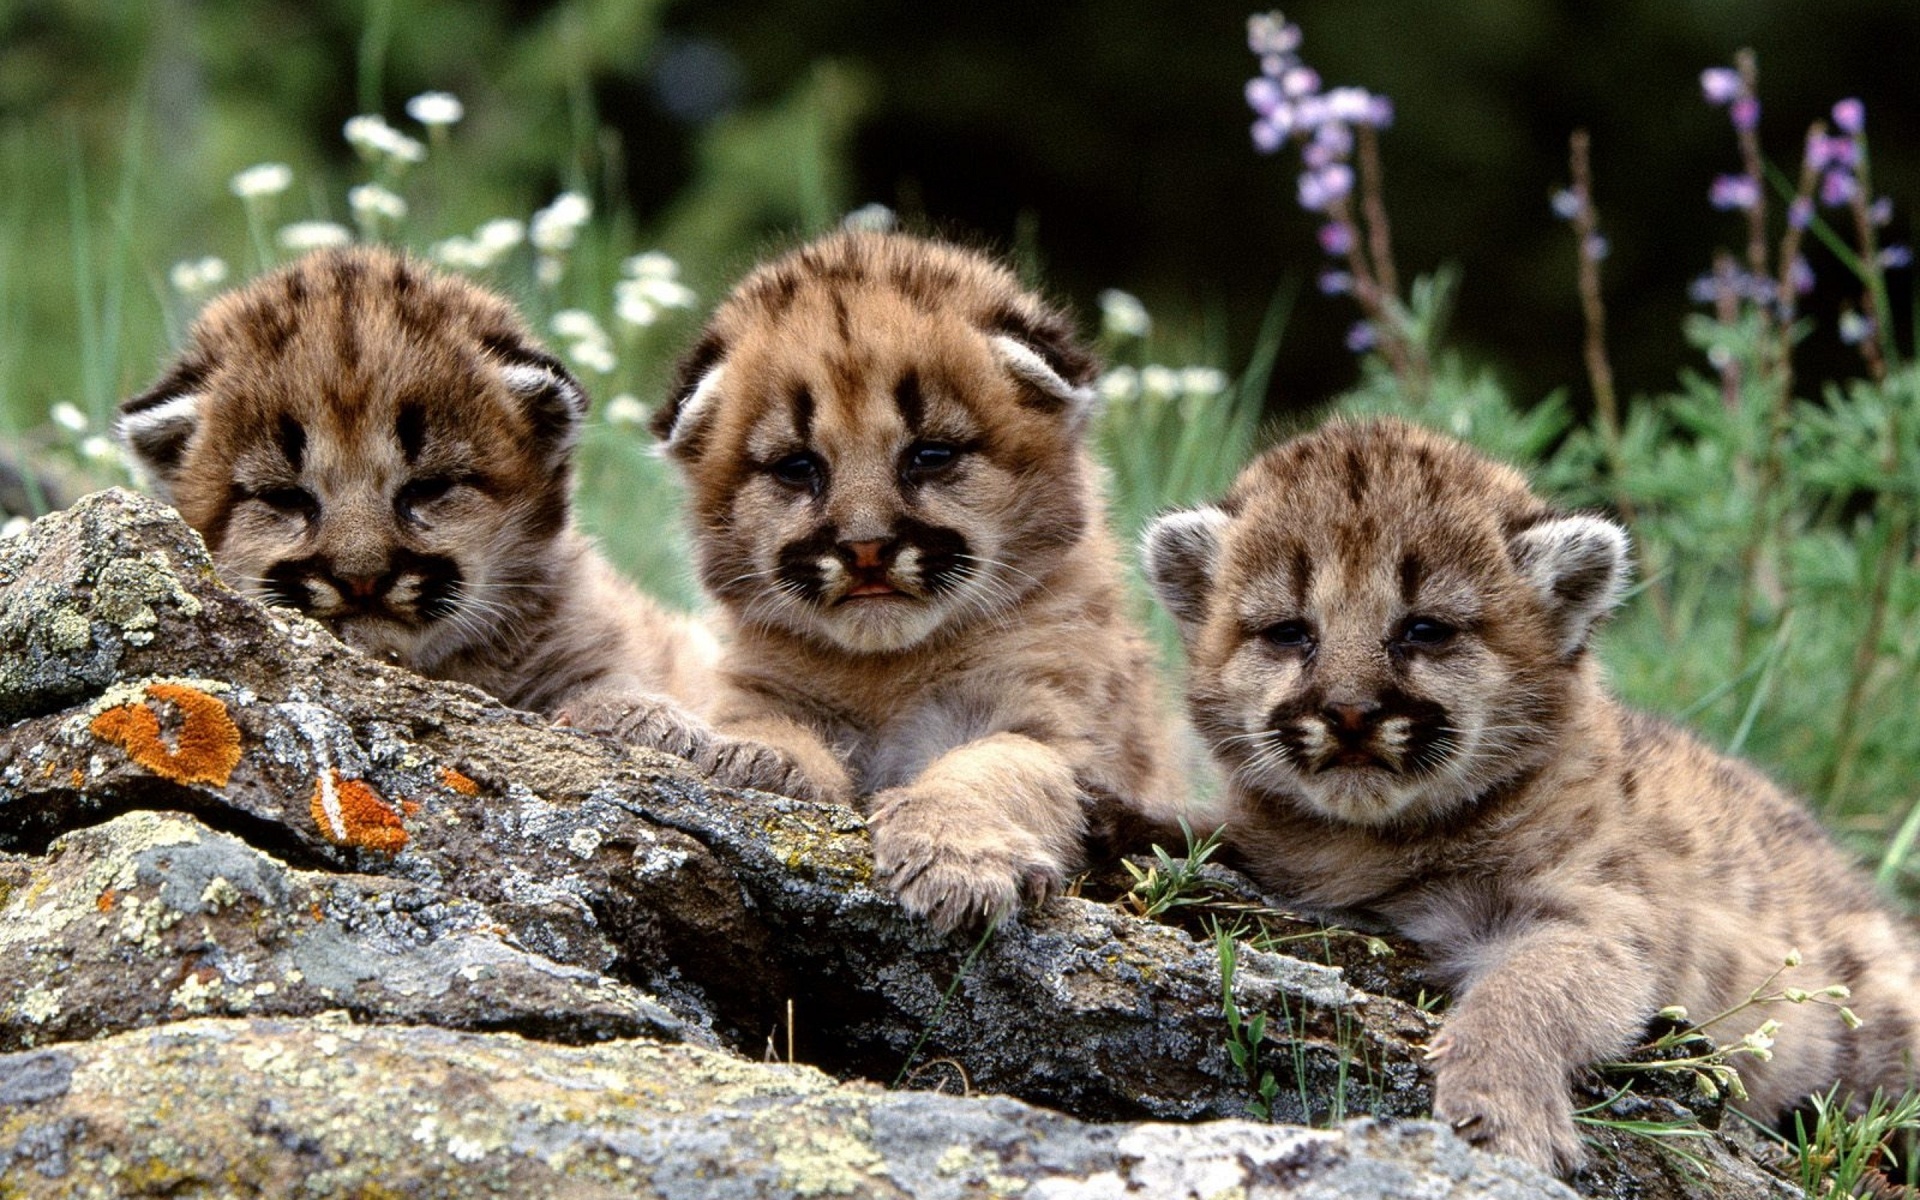 mountain, Lion, Cubs, Cougars, Animals, Cats, Babies, Fur, Faces, Eyes, Whiskers, Rocks, Wildlife, Predators, Flowers, Grass, Cute, Children Wallpaper